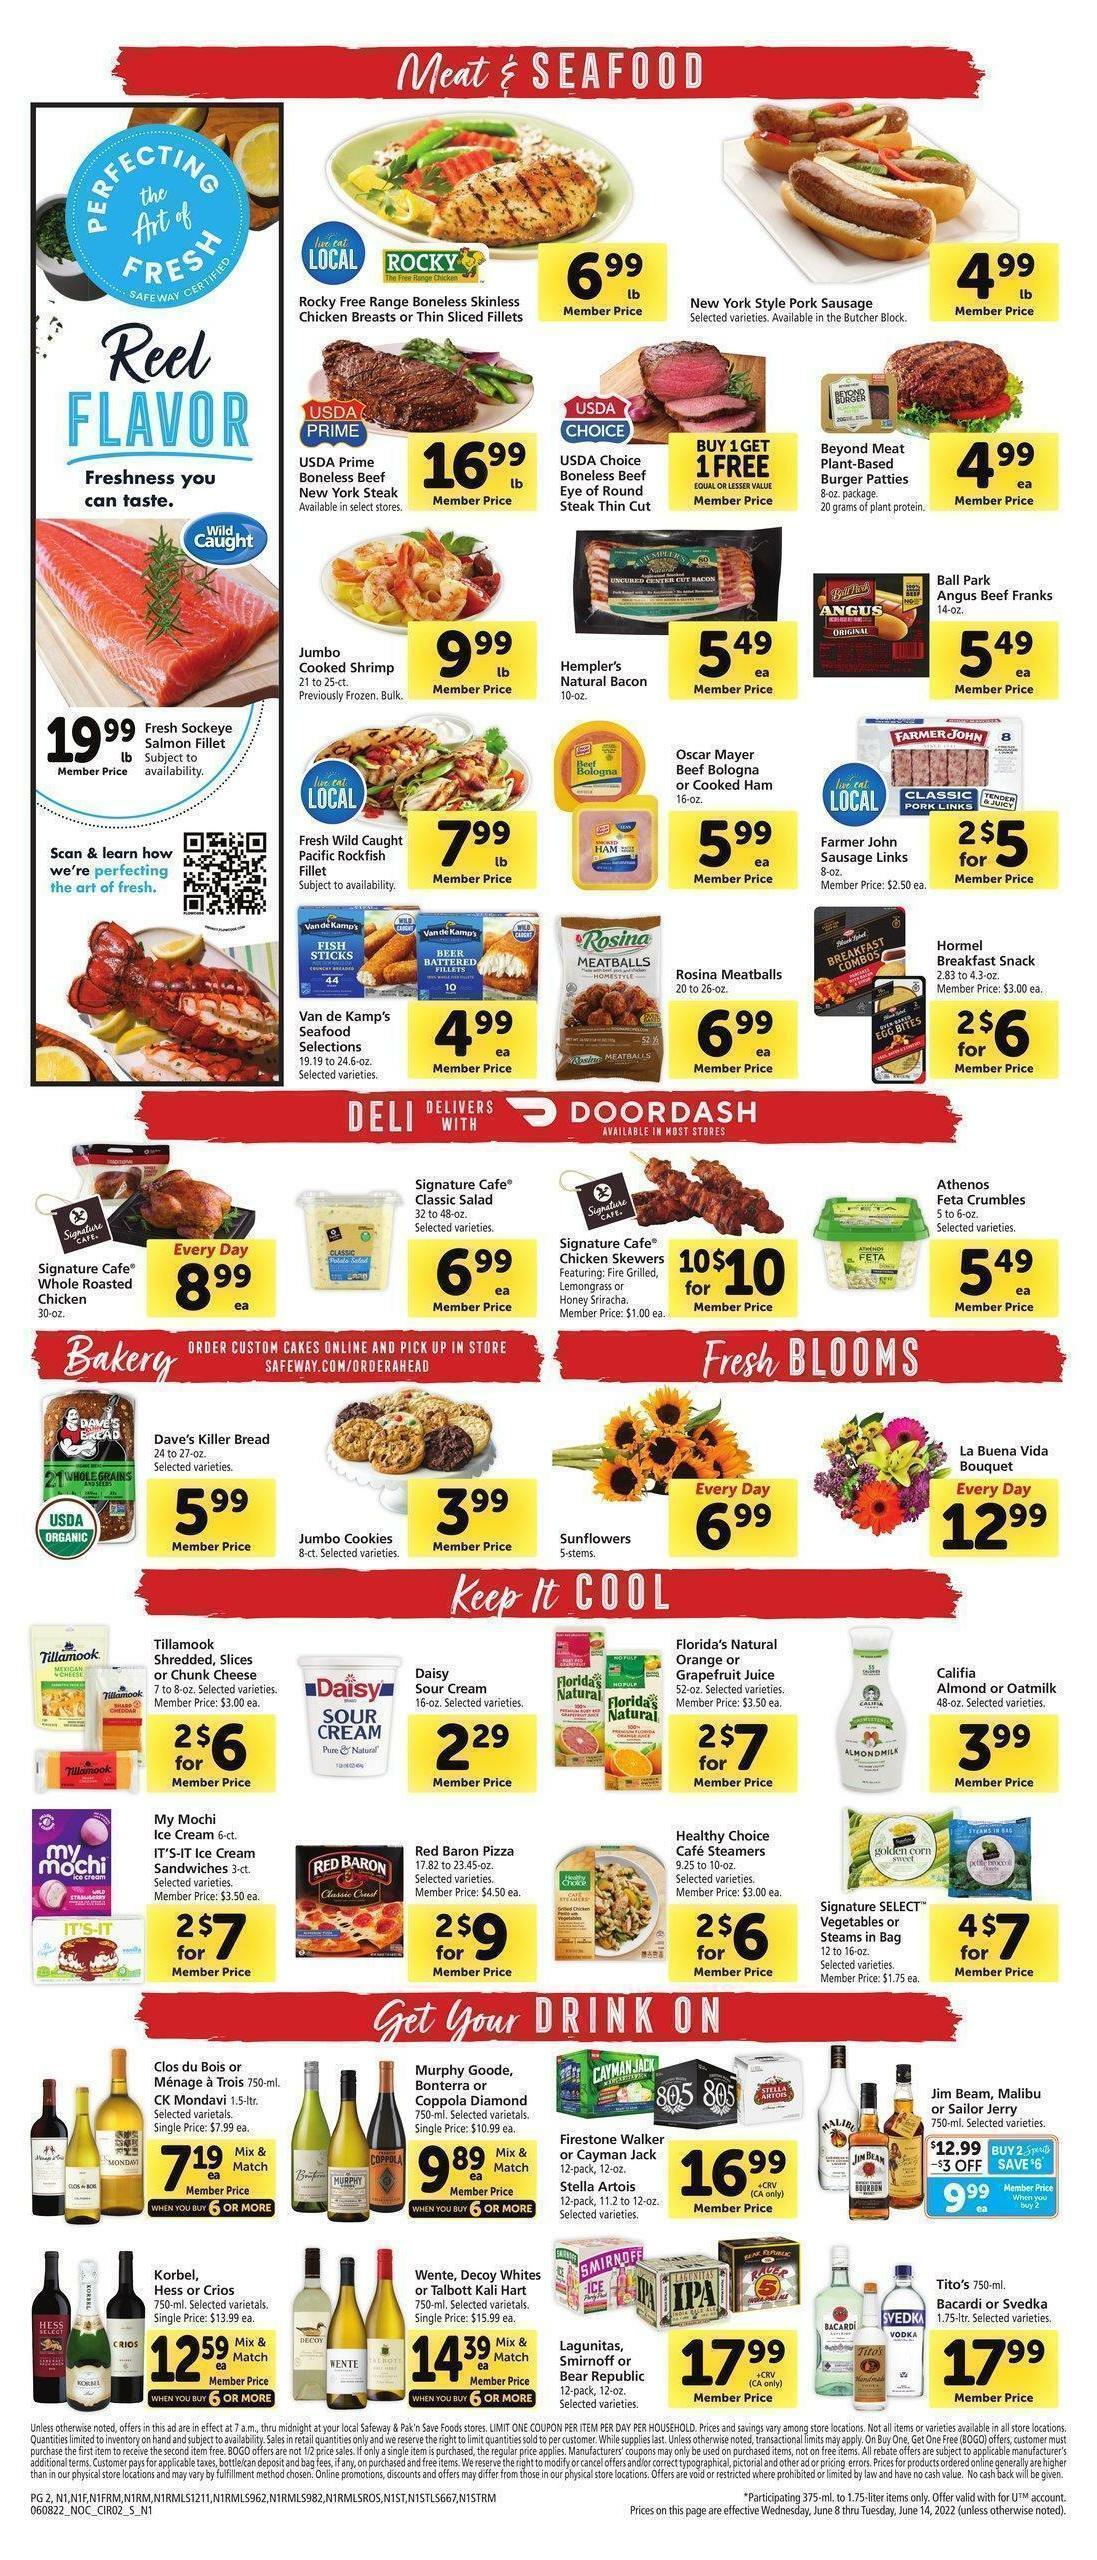 Safeway Weekly Ad from June 8